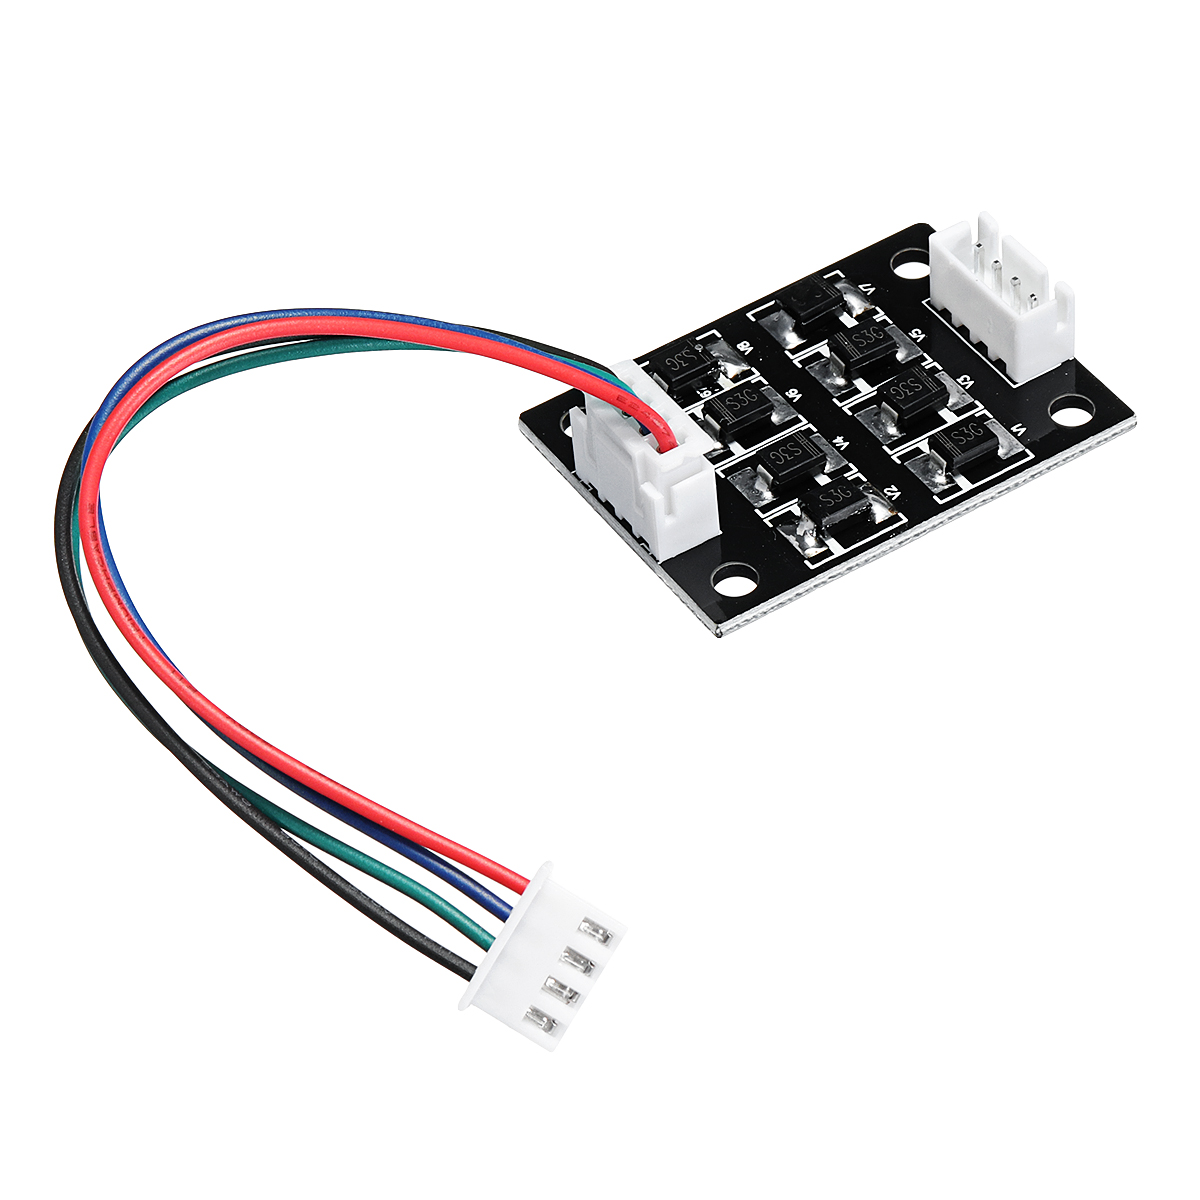 5PCS TL-Smoother Addon Module With Dupont Line For 3D Printer Stepper Motor 13